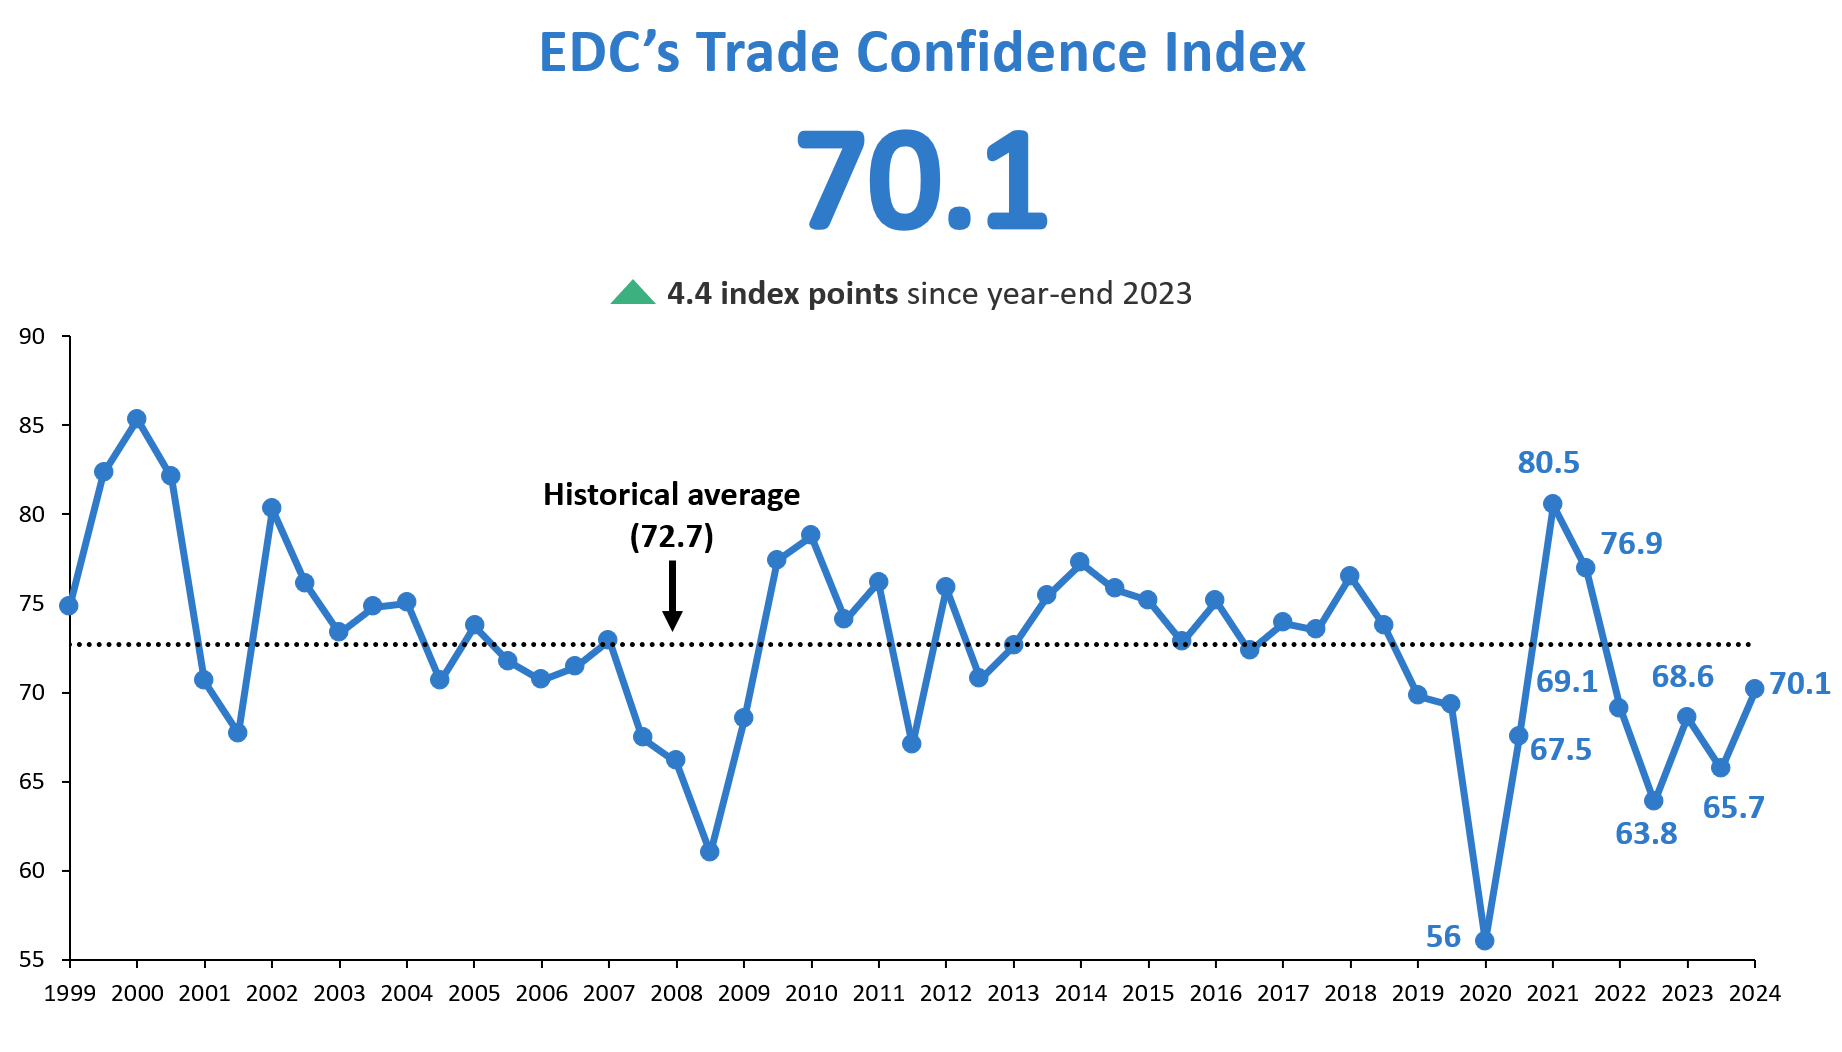 Trade confidence is at 65.7 (down 2.9 index points since our June survey)